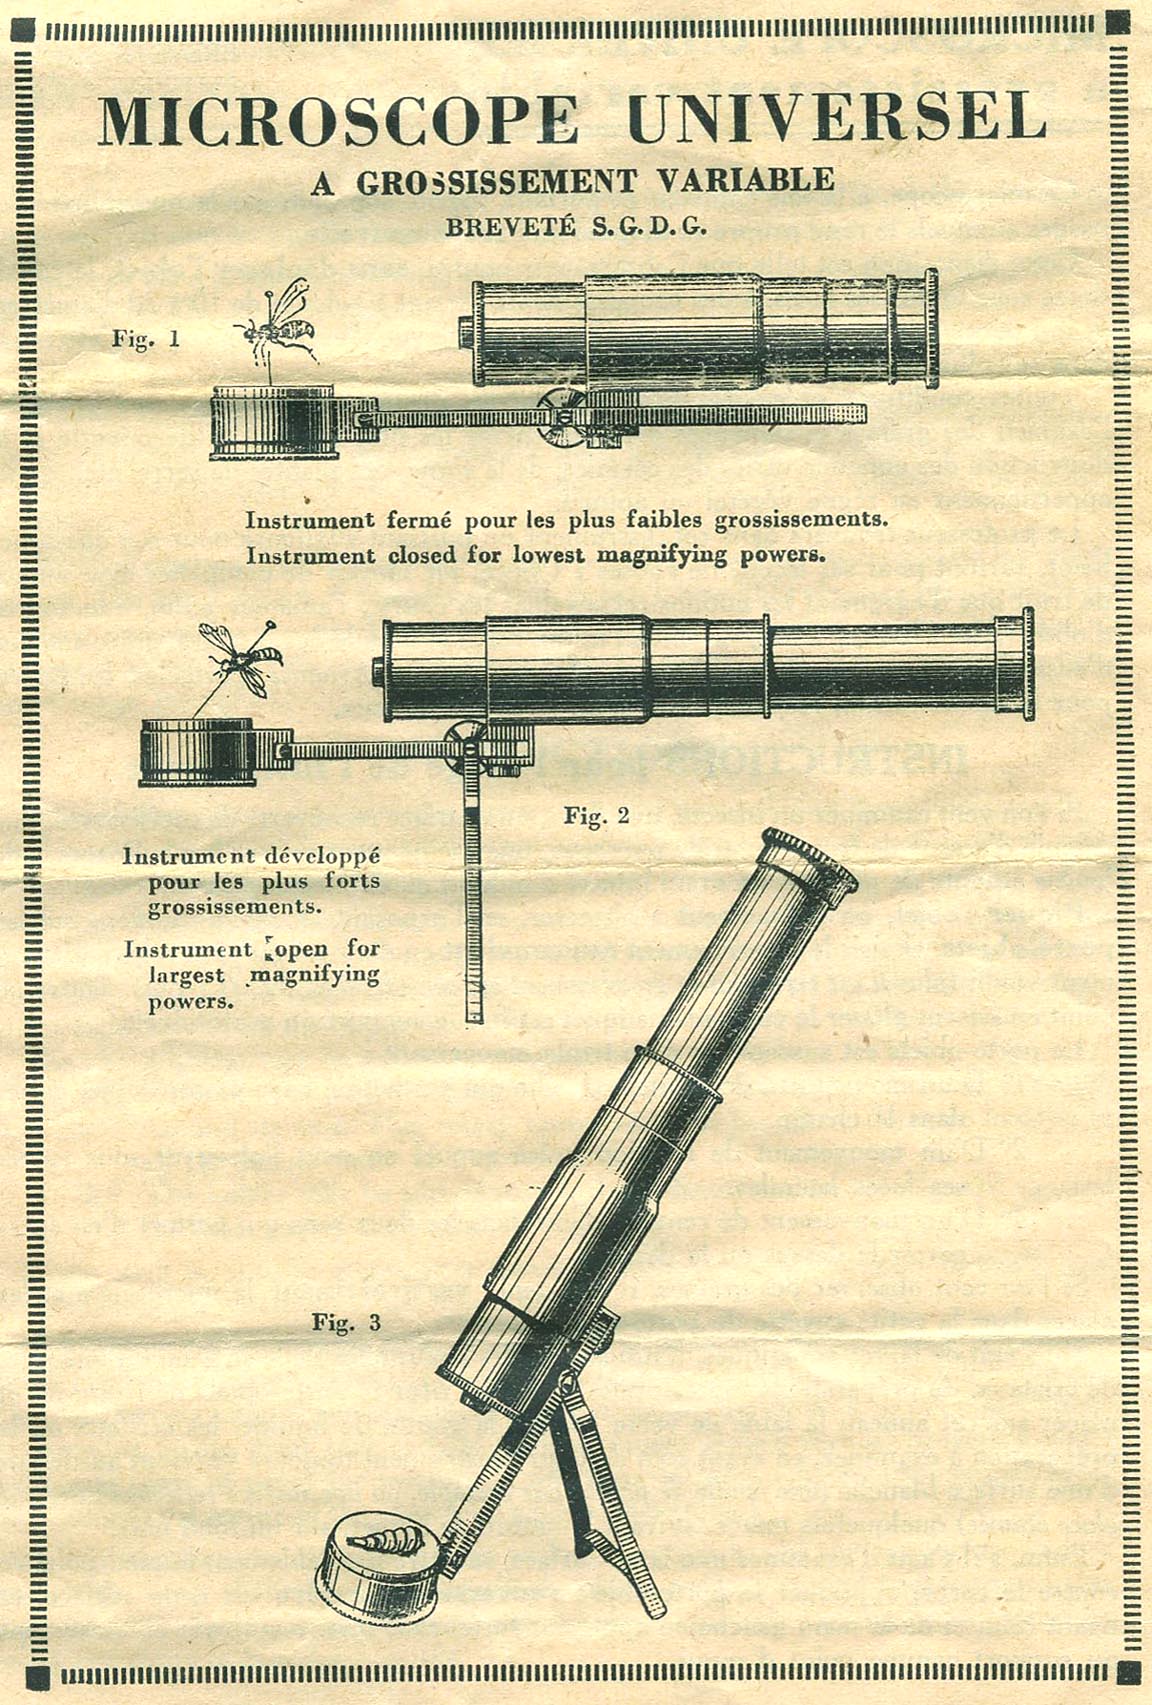  french scope